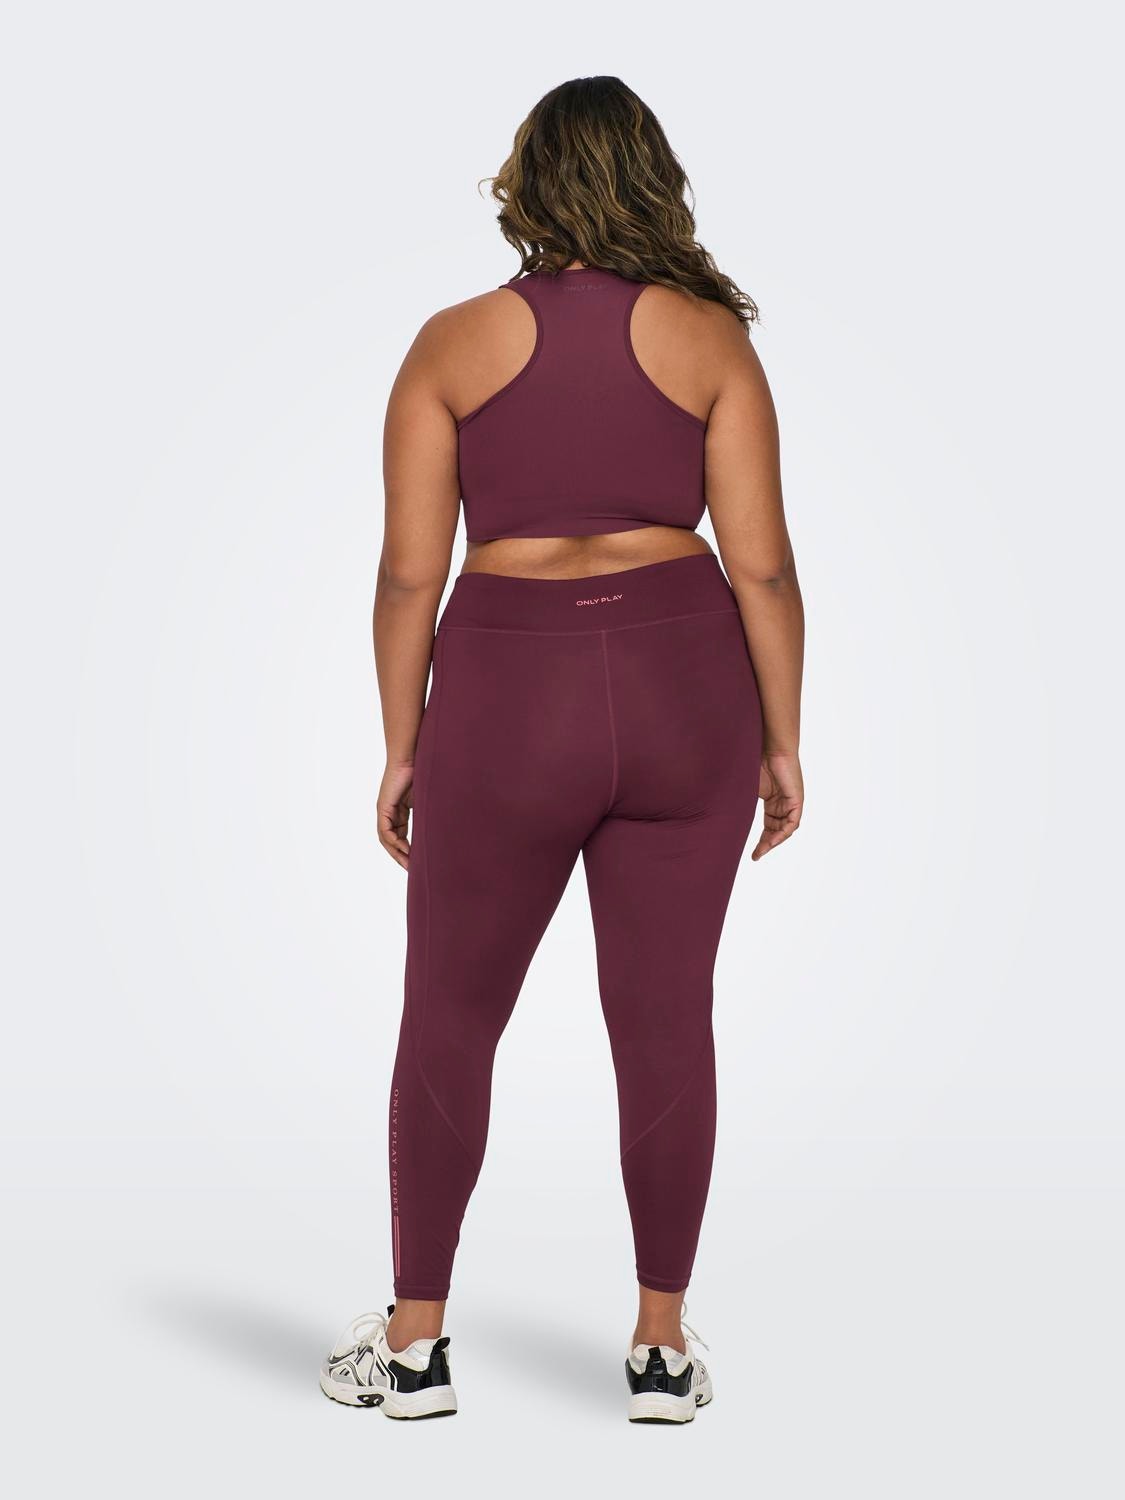 ONLY Curvy seamless Sports-BH -Windsor Wine - 15200911